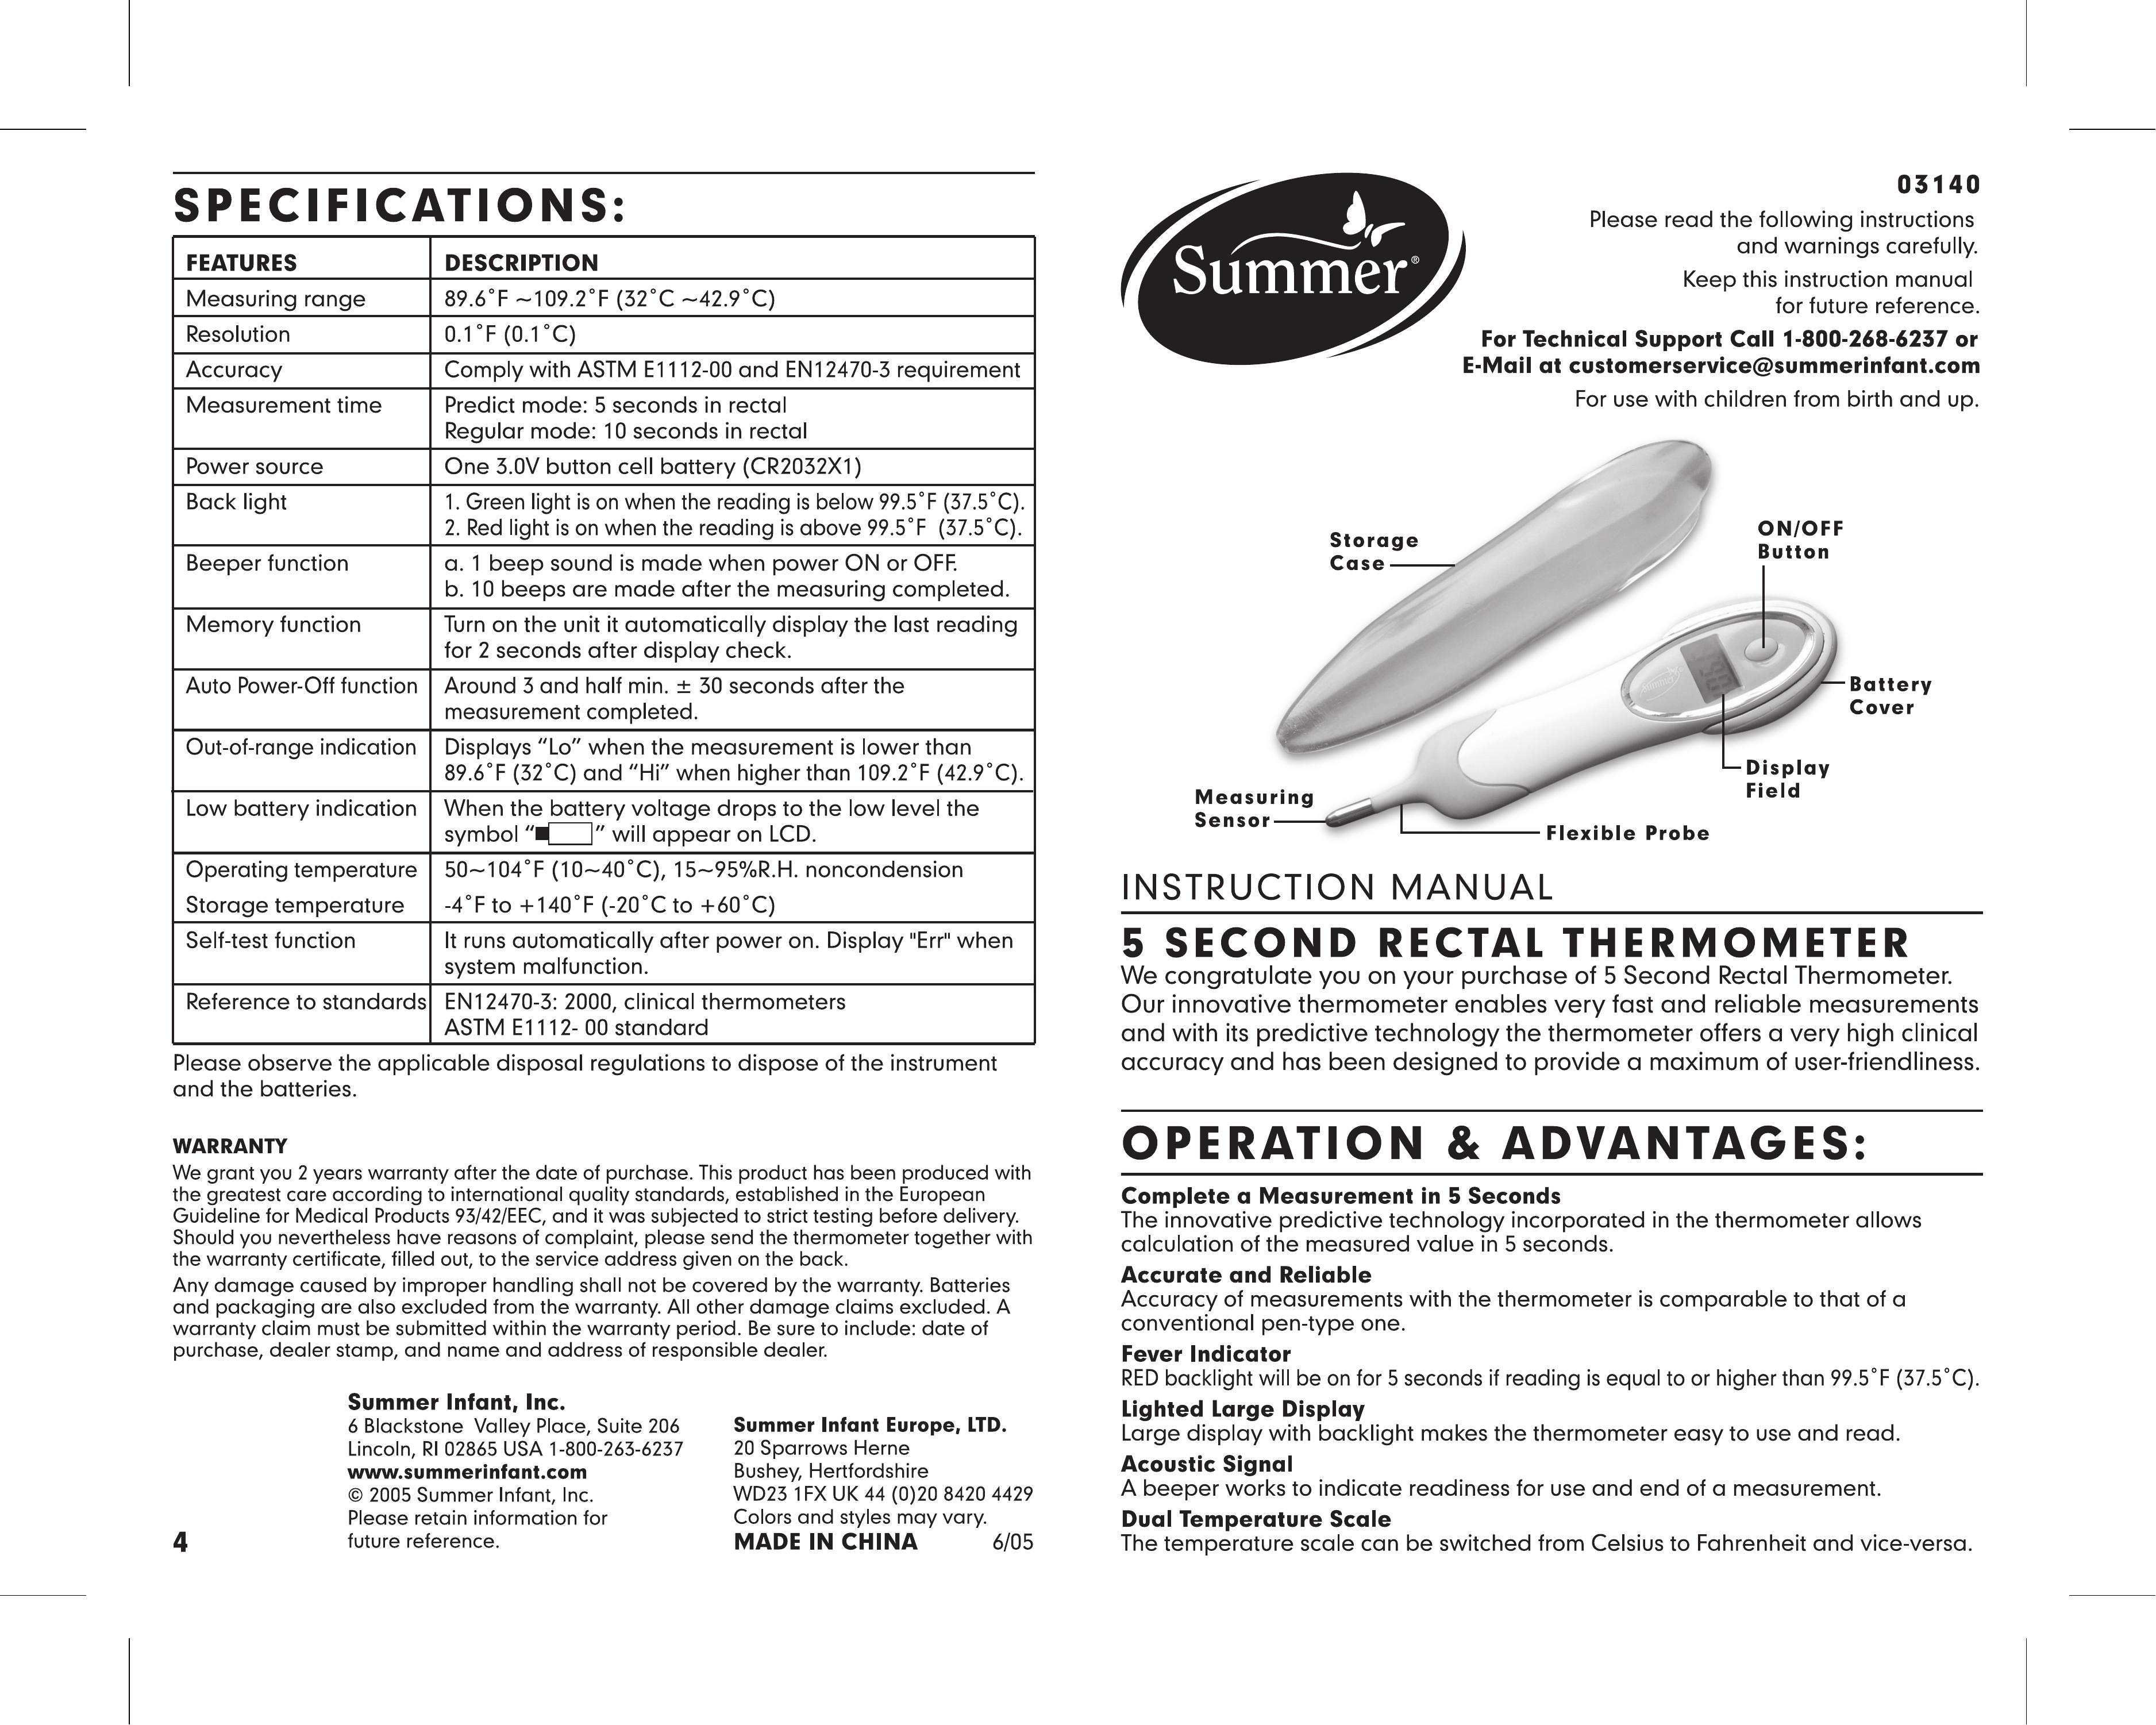 Summer Infant 3140 Thermometer User Manual